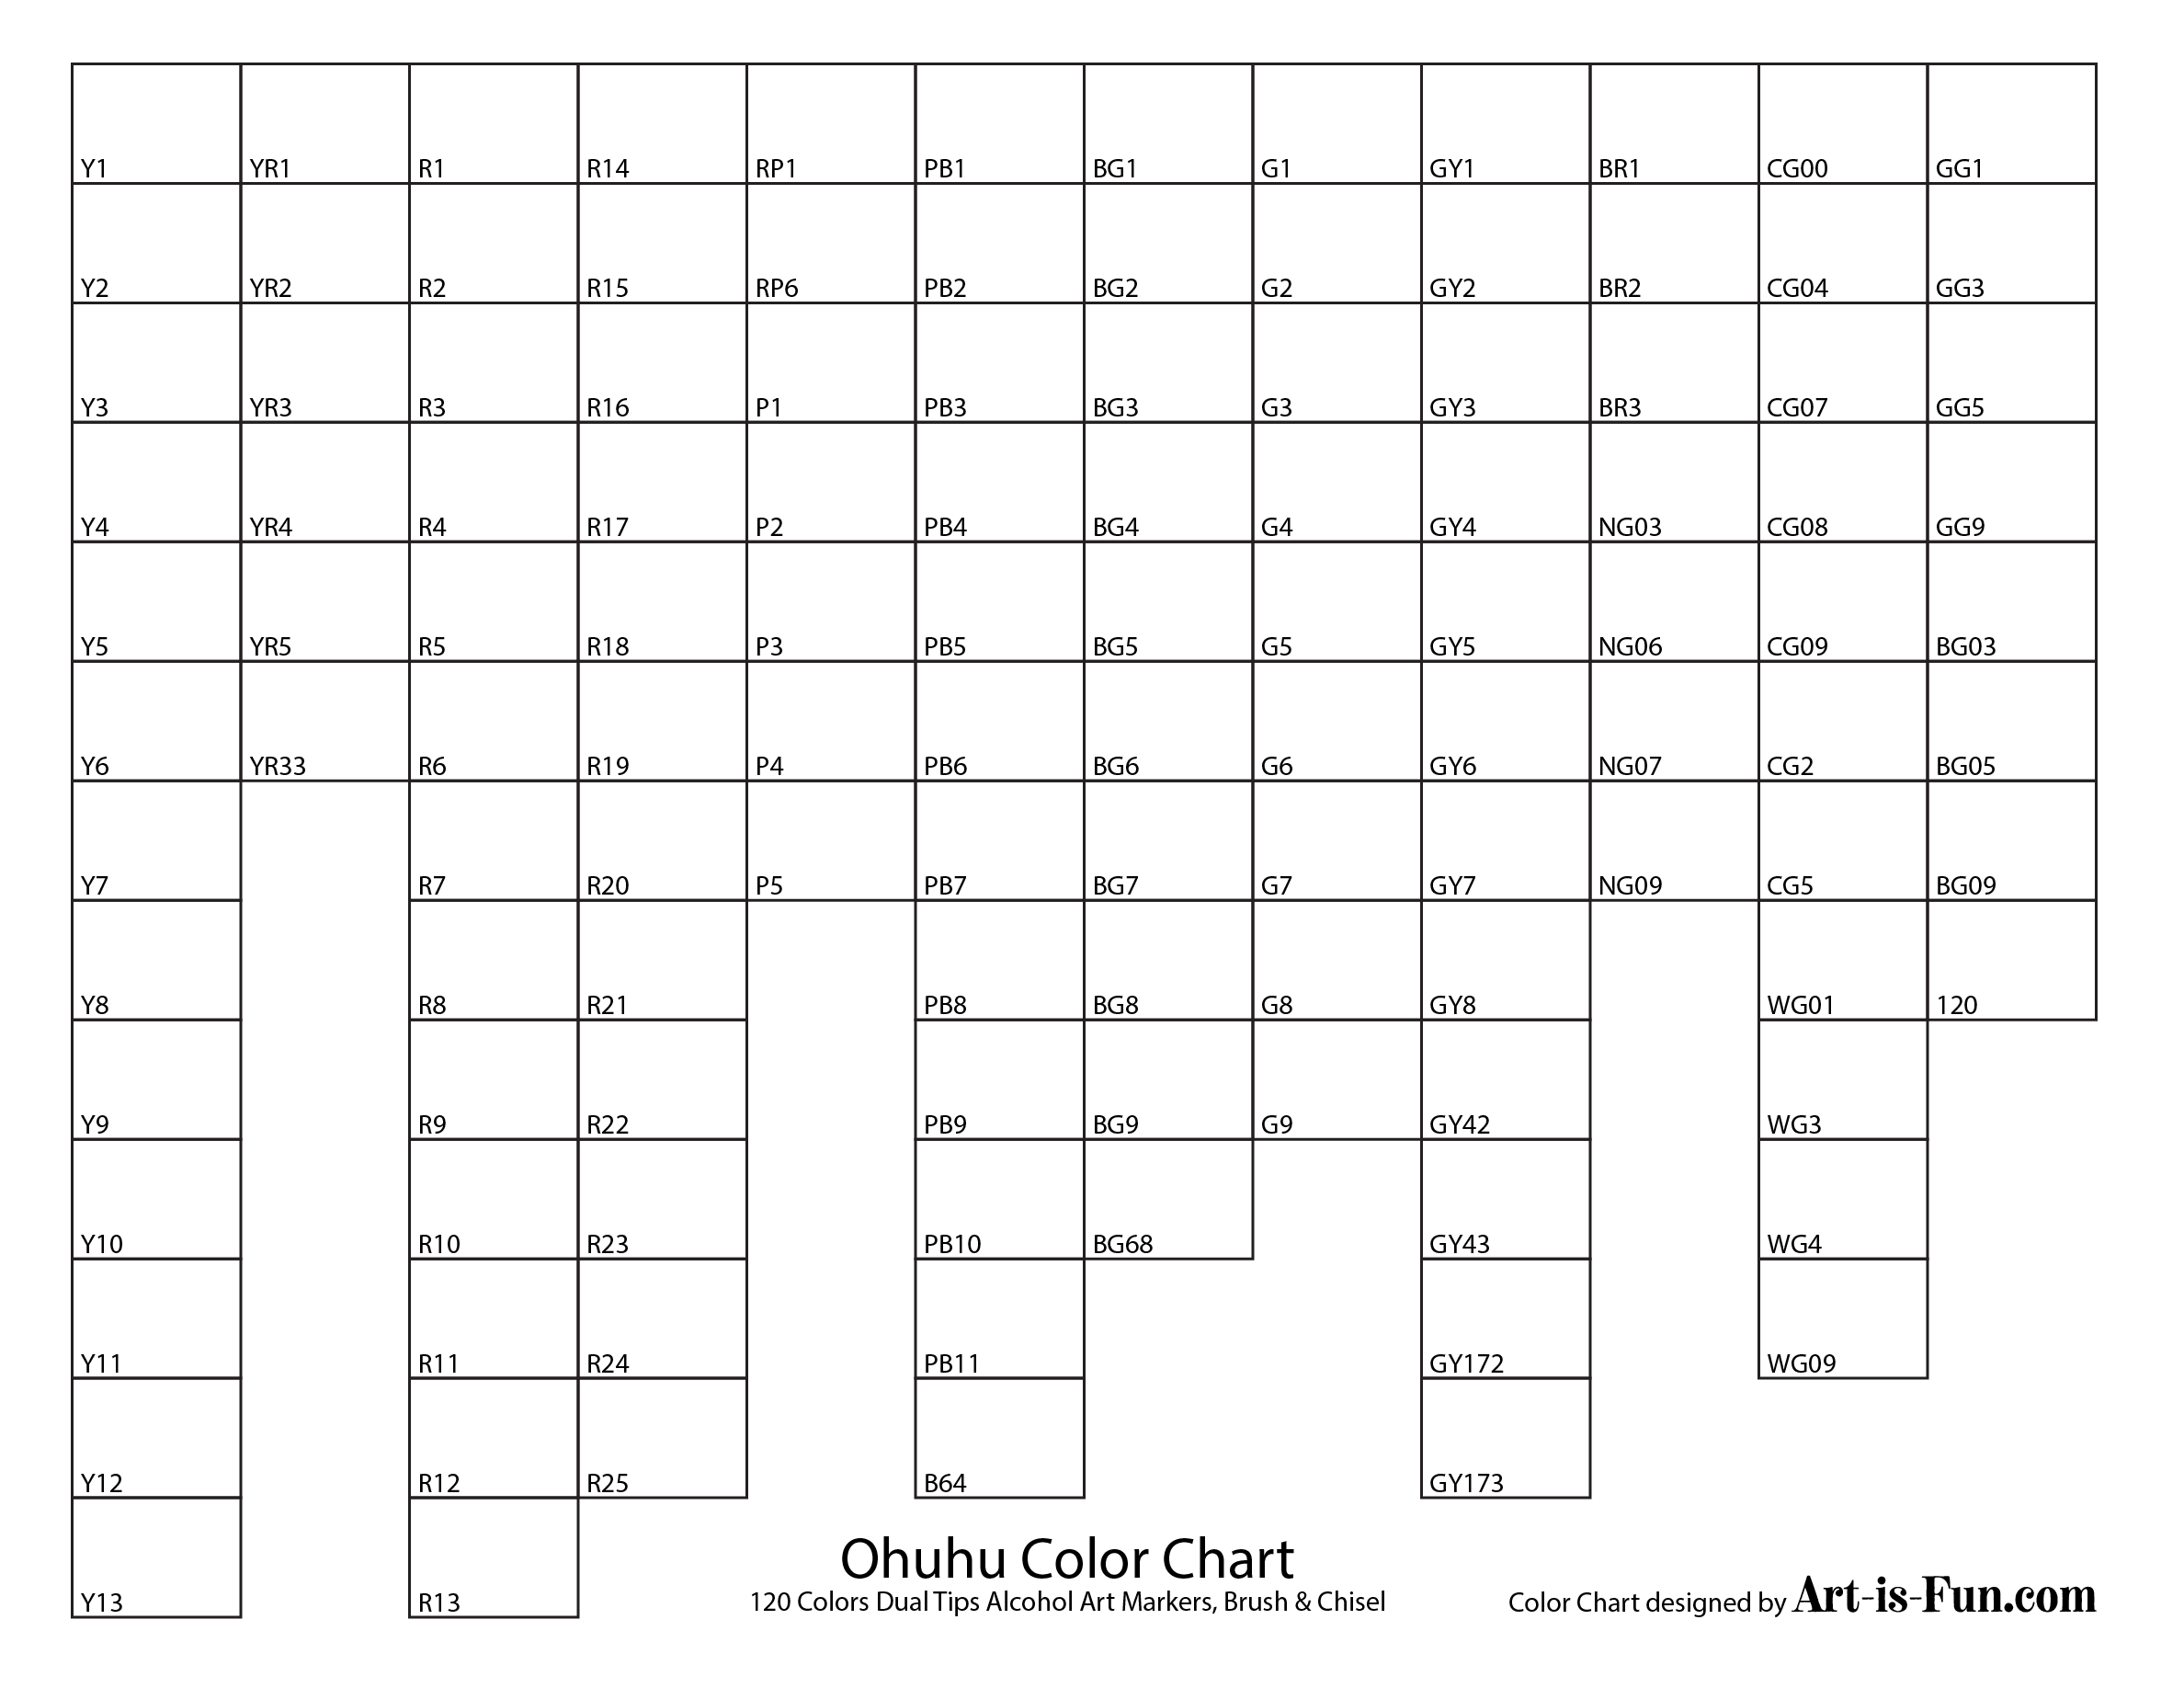 https://www.art-is-fun.com/s/Ohuhu-Color-Chart-from-Art-is-Fun.png